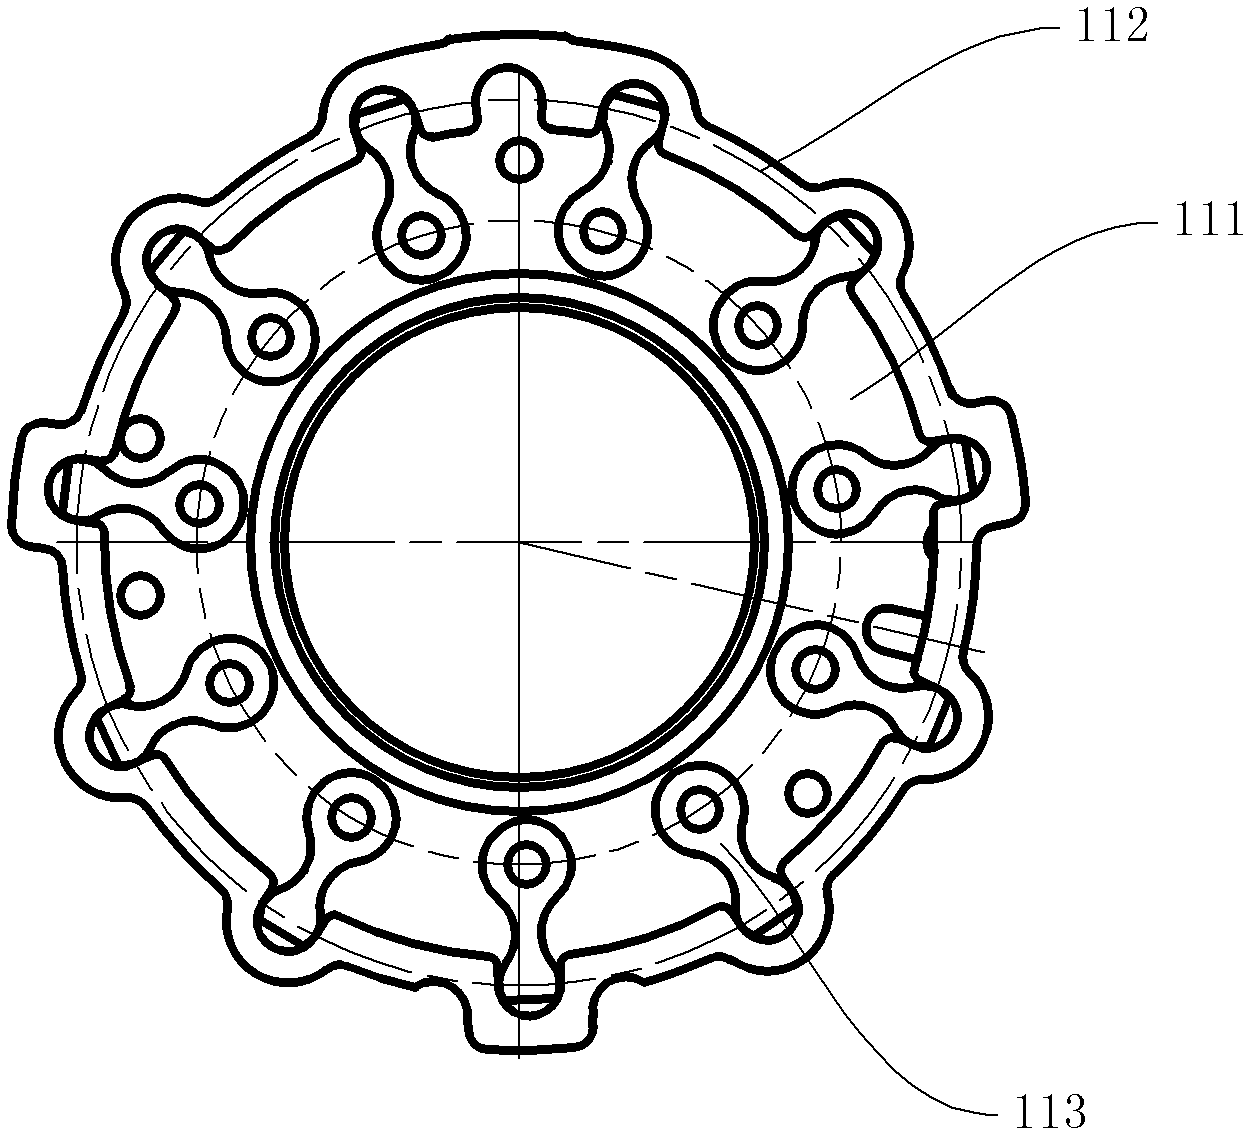 Electrically controlled variable geometrical turbocharger